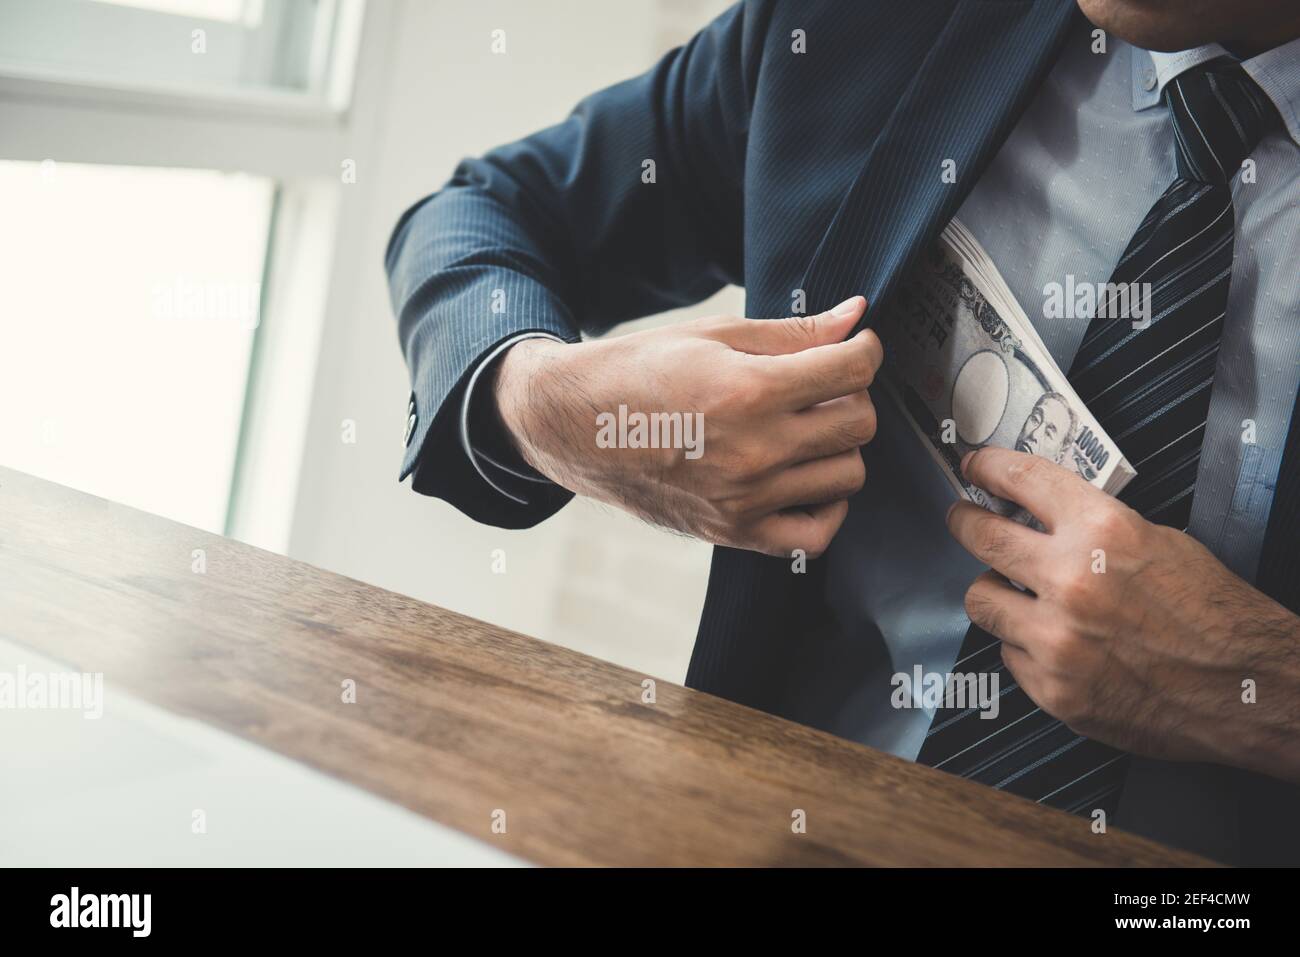 Businessman putting money, Japanese  yen banknotes, into his suit pocket - bribery and corruption concept Stock Photo